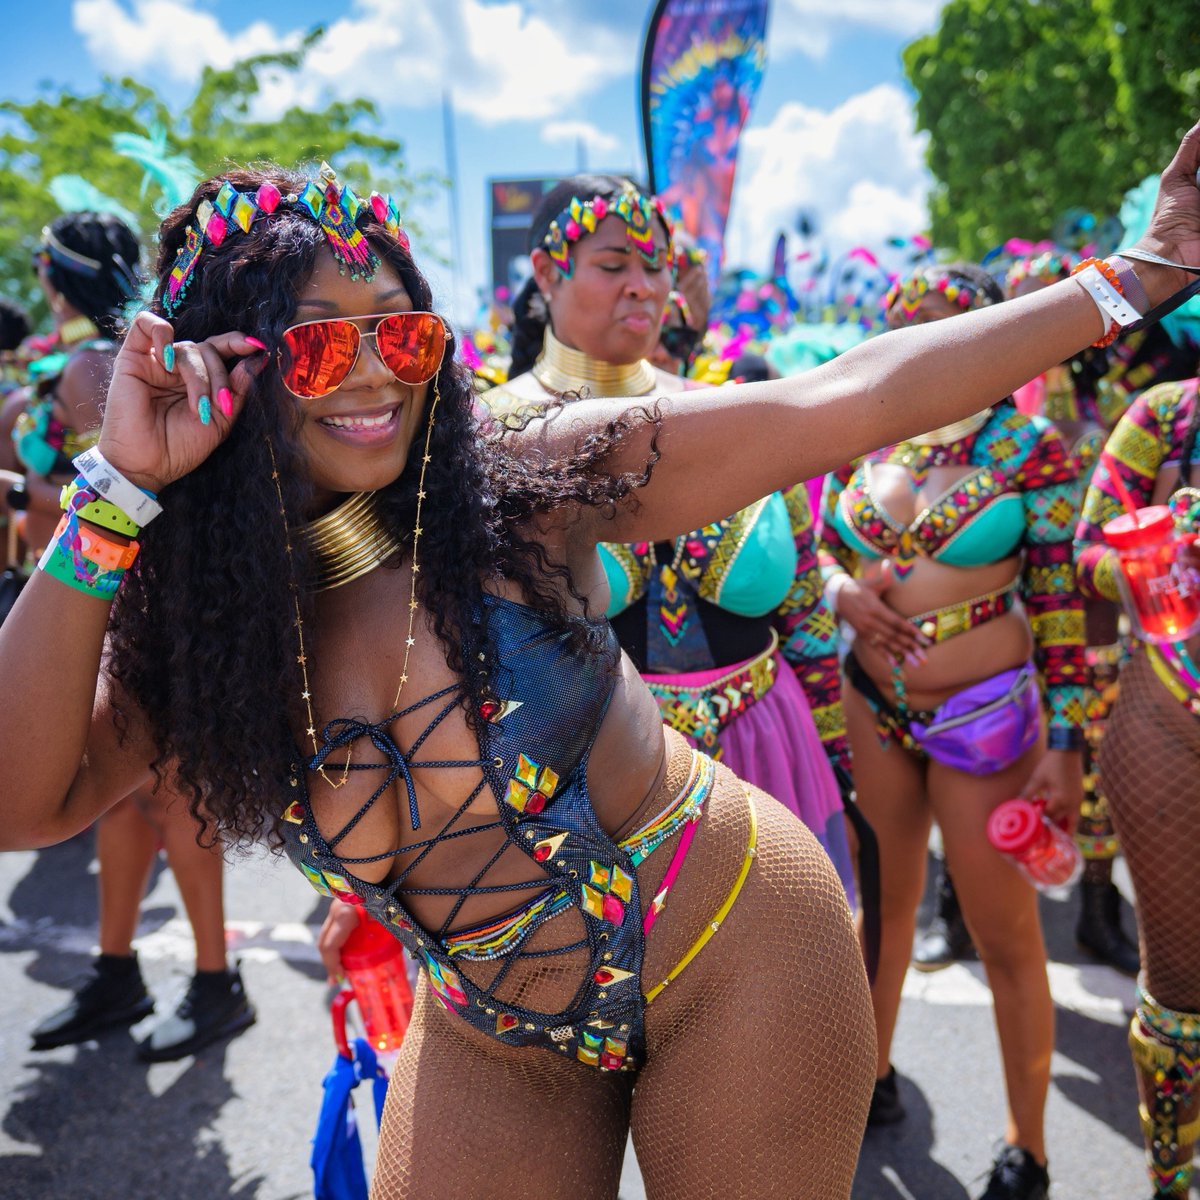 MOOD because there's only 91 MORE DAYSSSS until we're back on the road!! 🗣️🔥
⁠
#j4fcarnival #j4f #stluciacarnival #stluciacarnival2023 #saintluciacarnival #saintluciacarnival2023 #stlucia #carnival2023 #travelsaintlucia